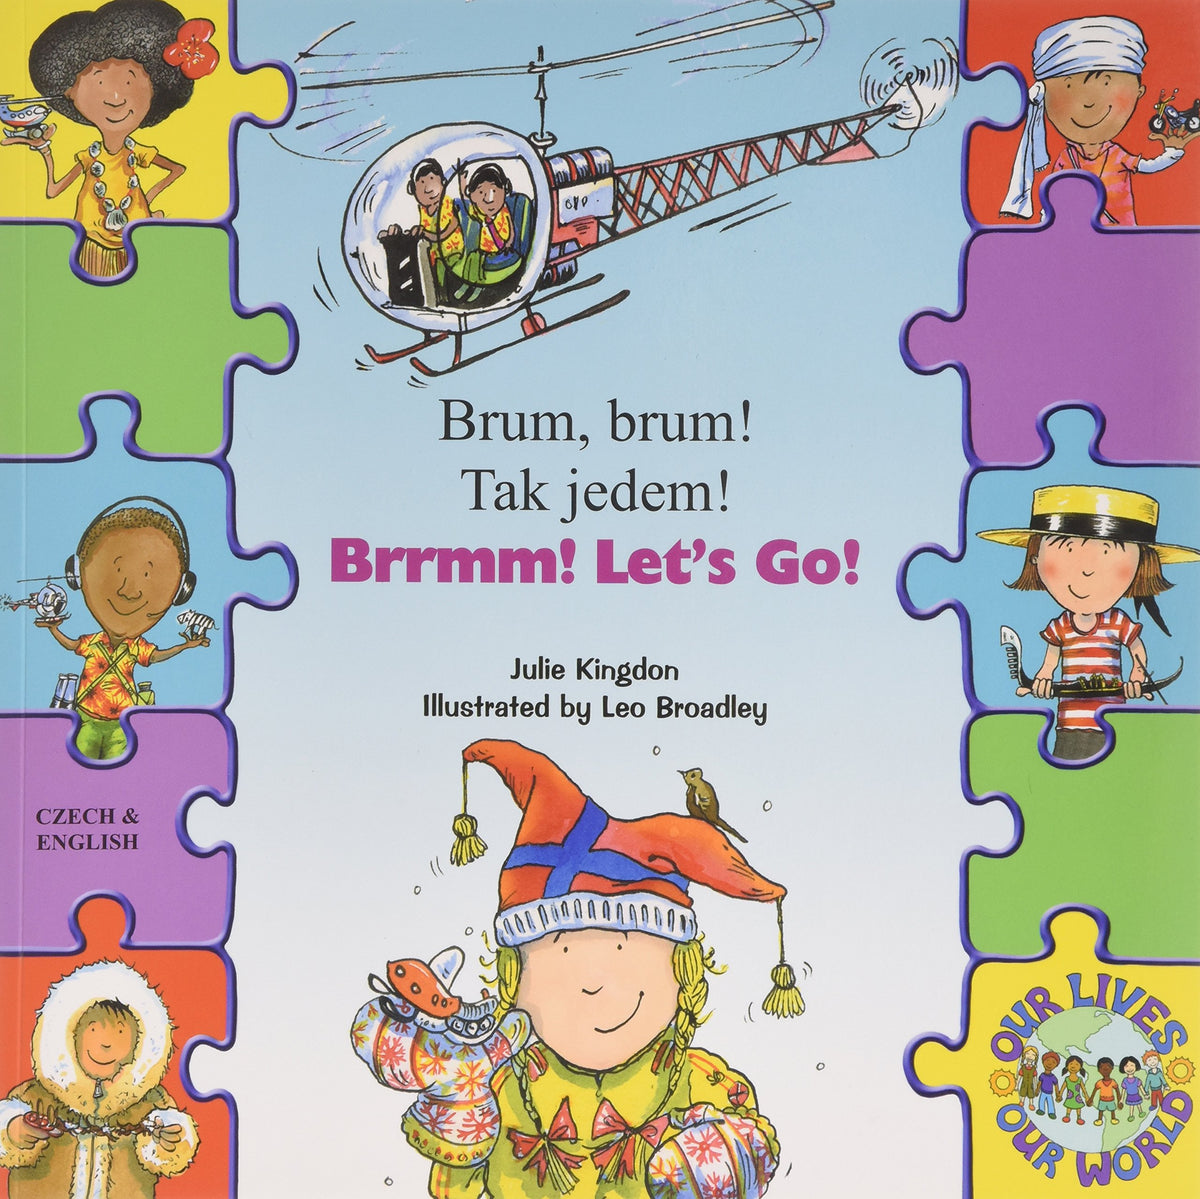 Brrmm! Let's Go! In Czech and English (Our Lives, Our World!)